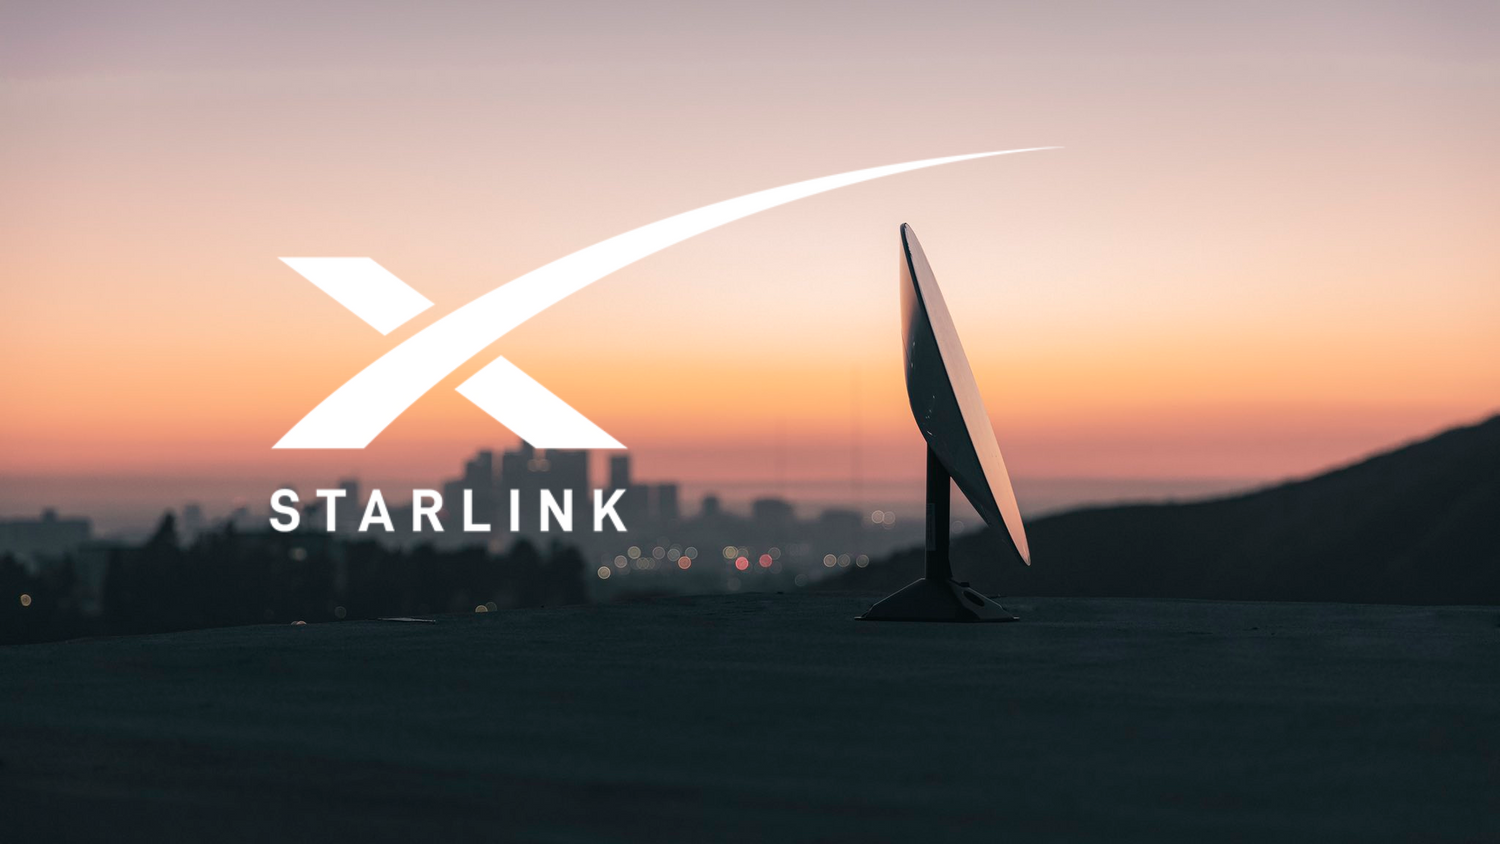 The Federation of Northern Ontario Municipalities supports access to SpaceX Starlink internet in Canada